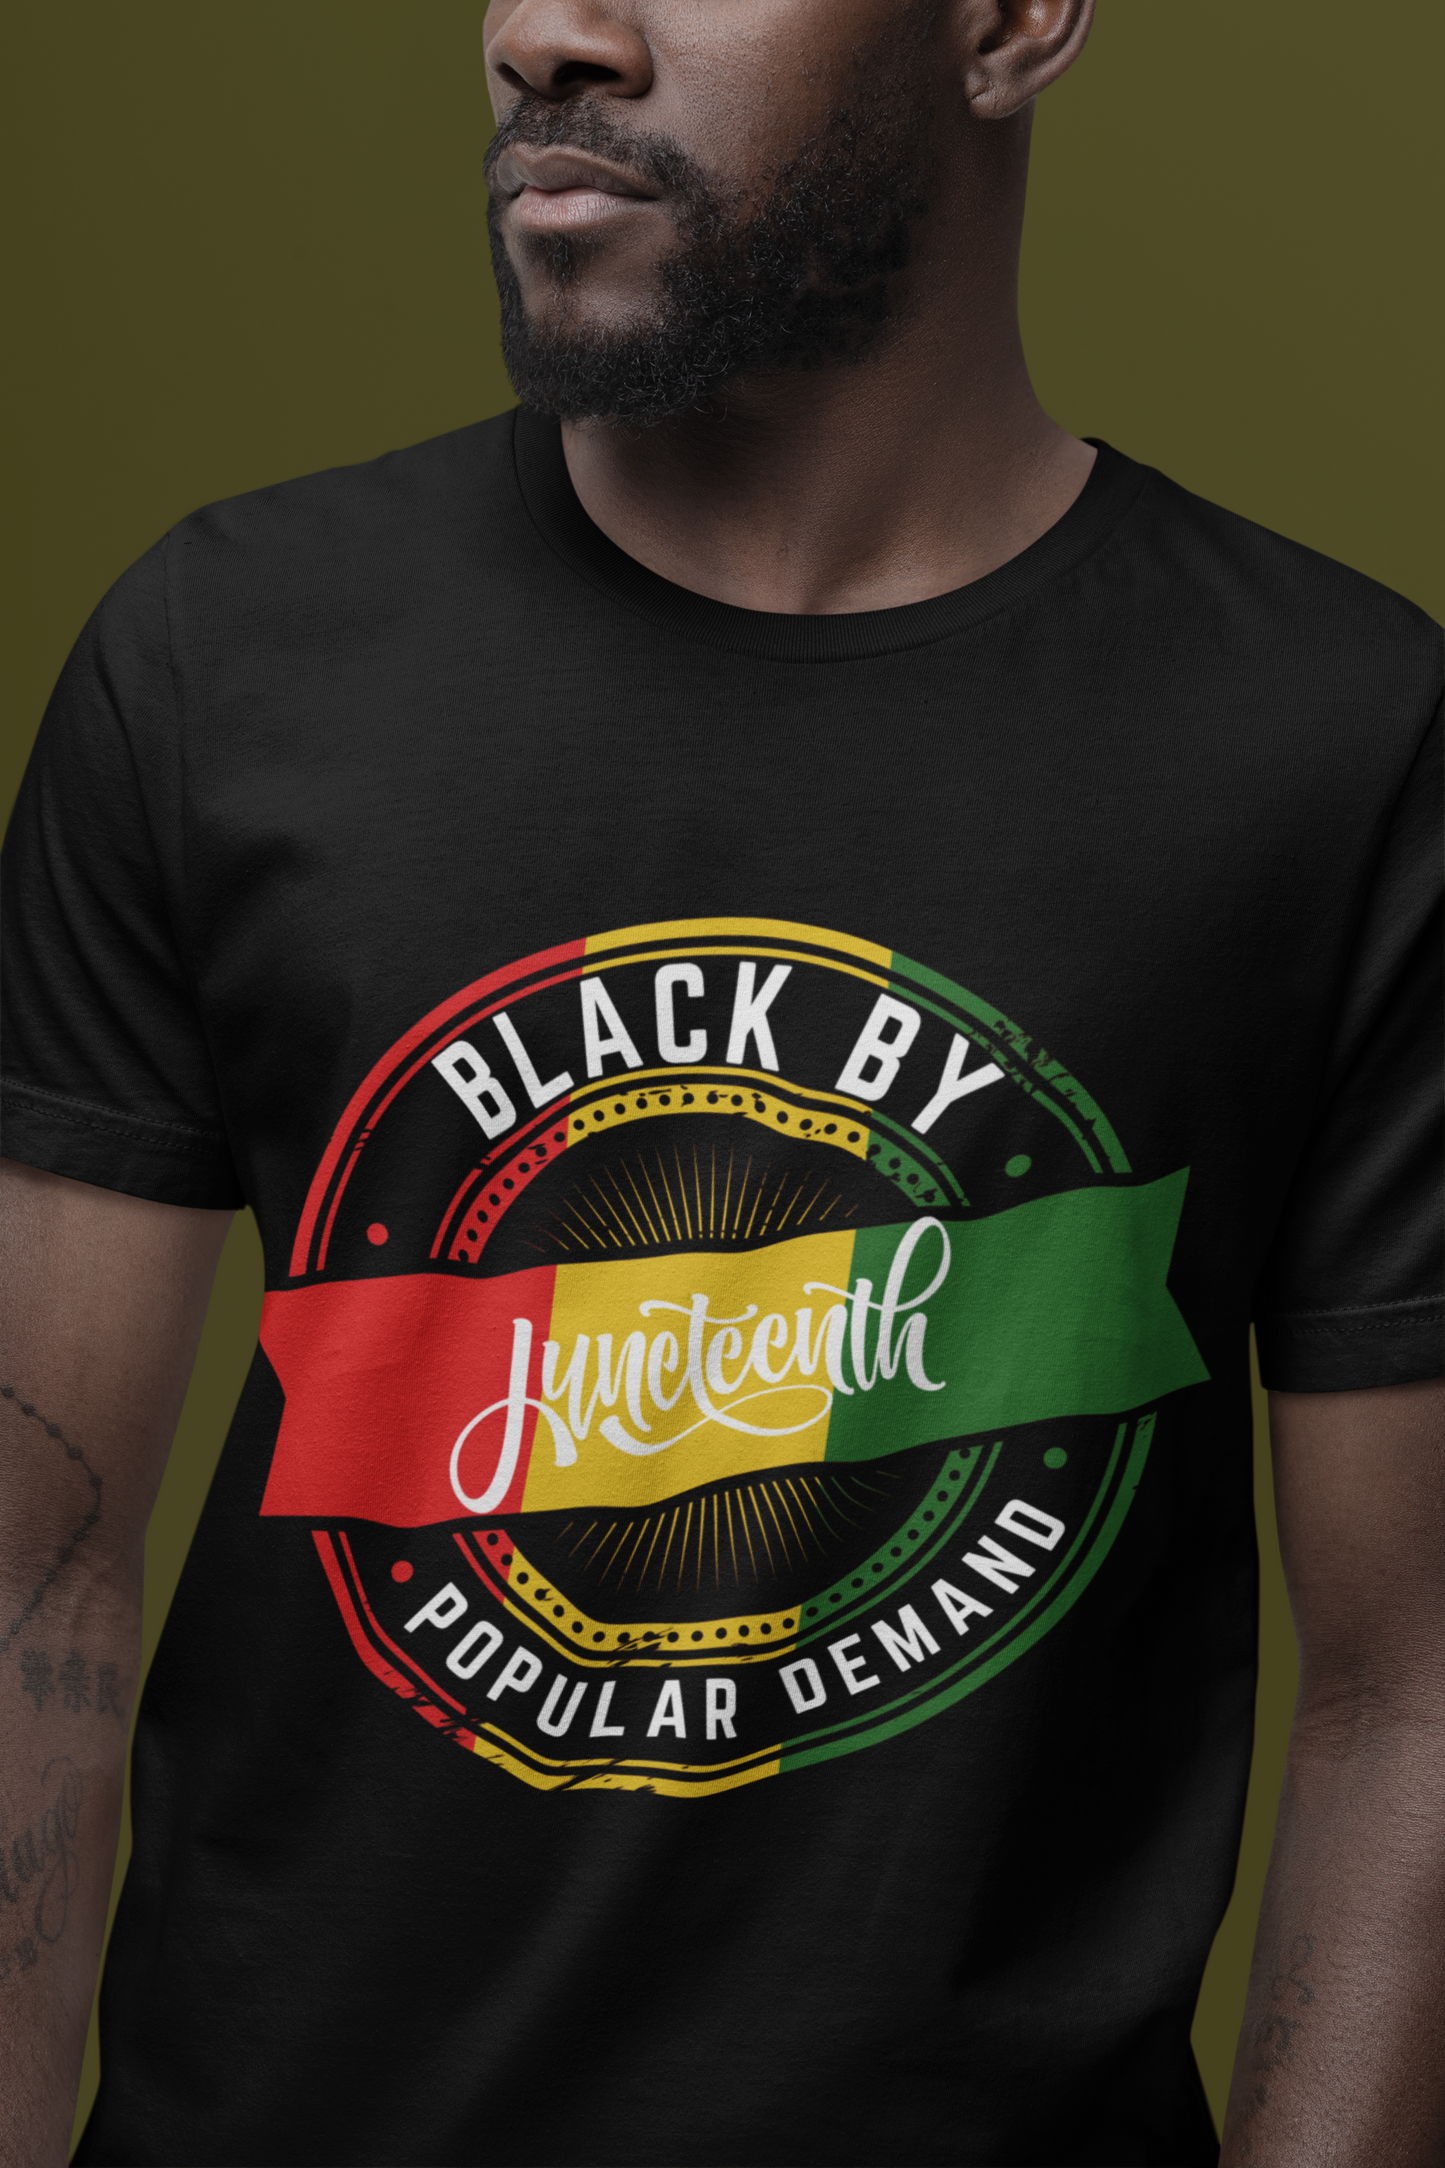 "JUNETEENTH - Black by Demand" - Limited Edition